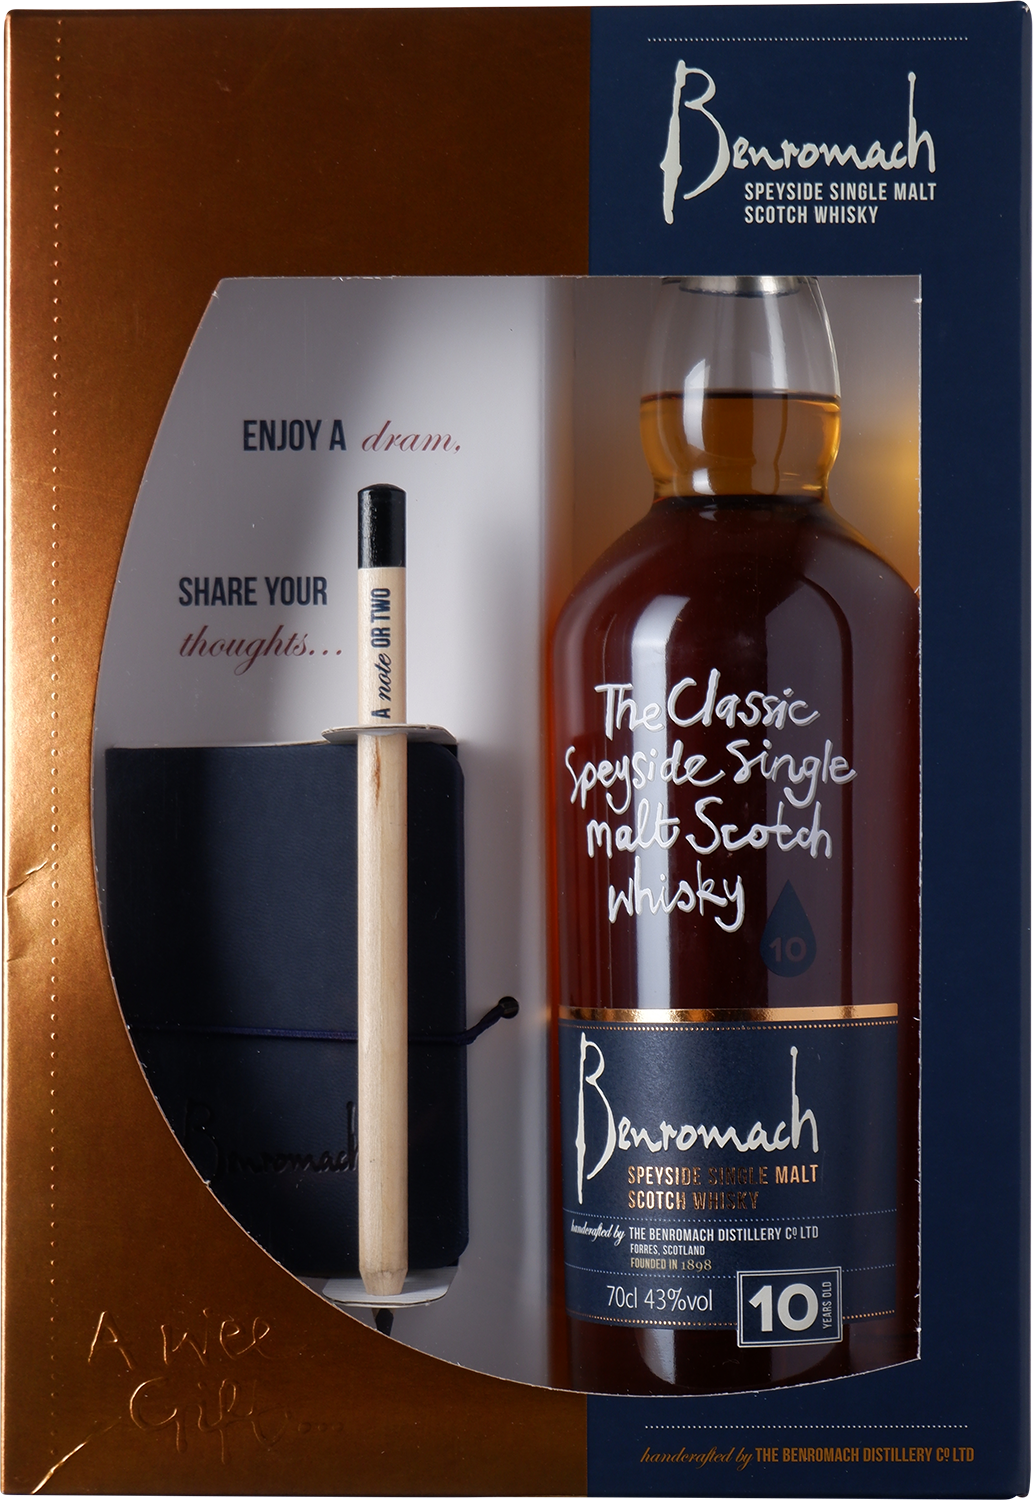 Benromach - Speyside Single Malt Whisky 10y old - gift pack + note book